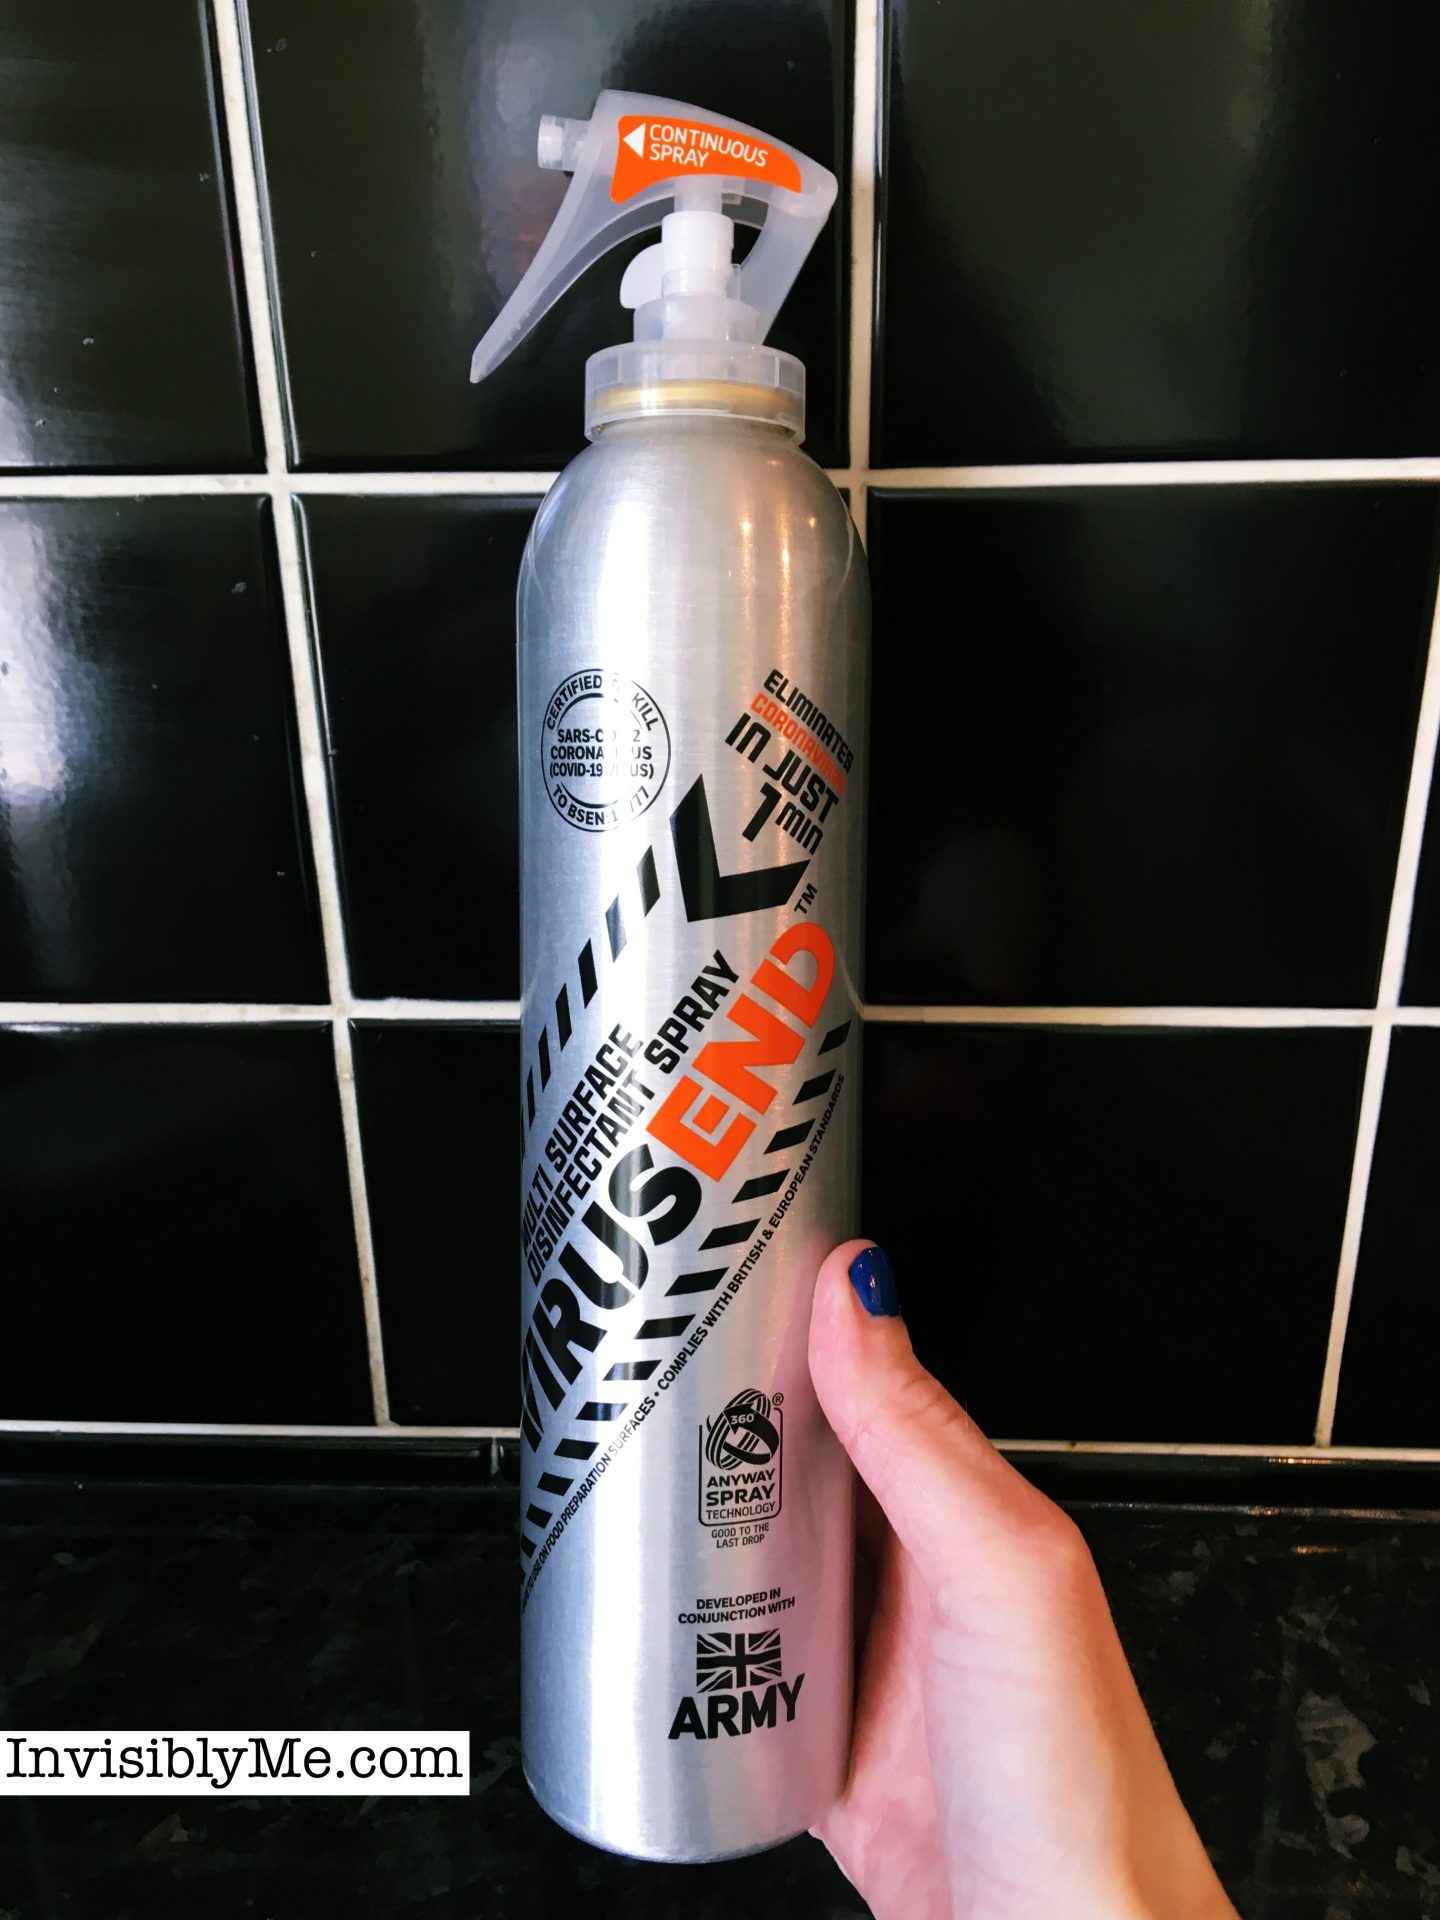 A photo of me holding the silver Virusend canister spray for the Deft and Virusend review against the black tiles in my kitchen.